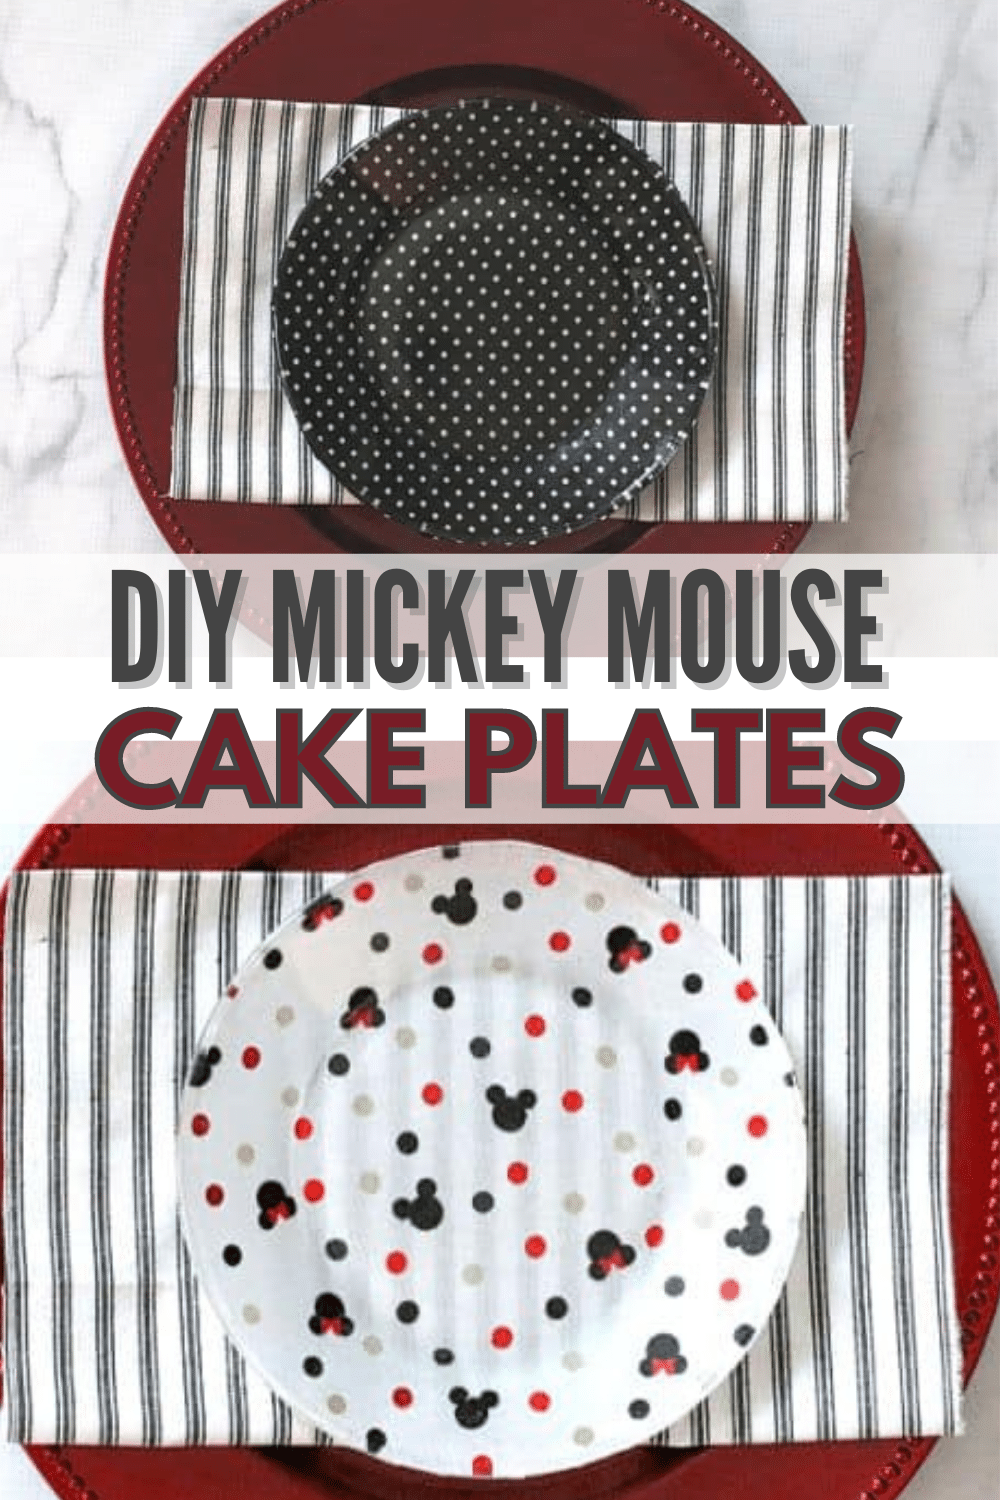 A quick stop at the Dollar Store and a few craft supplies are all you need for these DIY Mickey Mouse Cake plates! Perfect for Disney lovers. Love something else? Swap out the fabric with another pattern or design! #mickeymouse #diy #dollarstore #crafts via @wondermomwannab